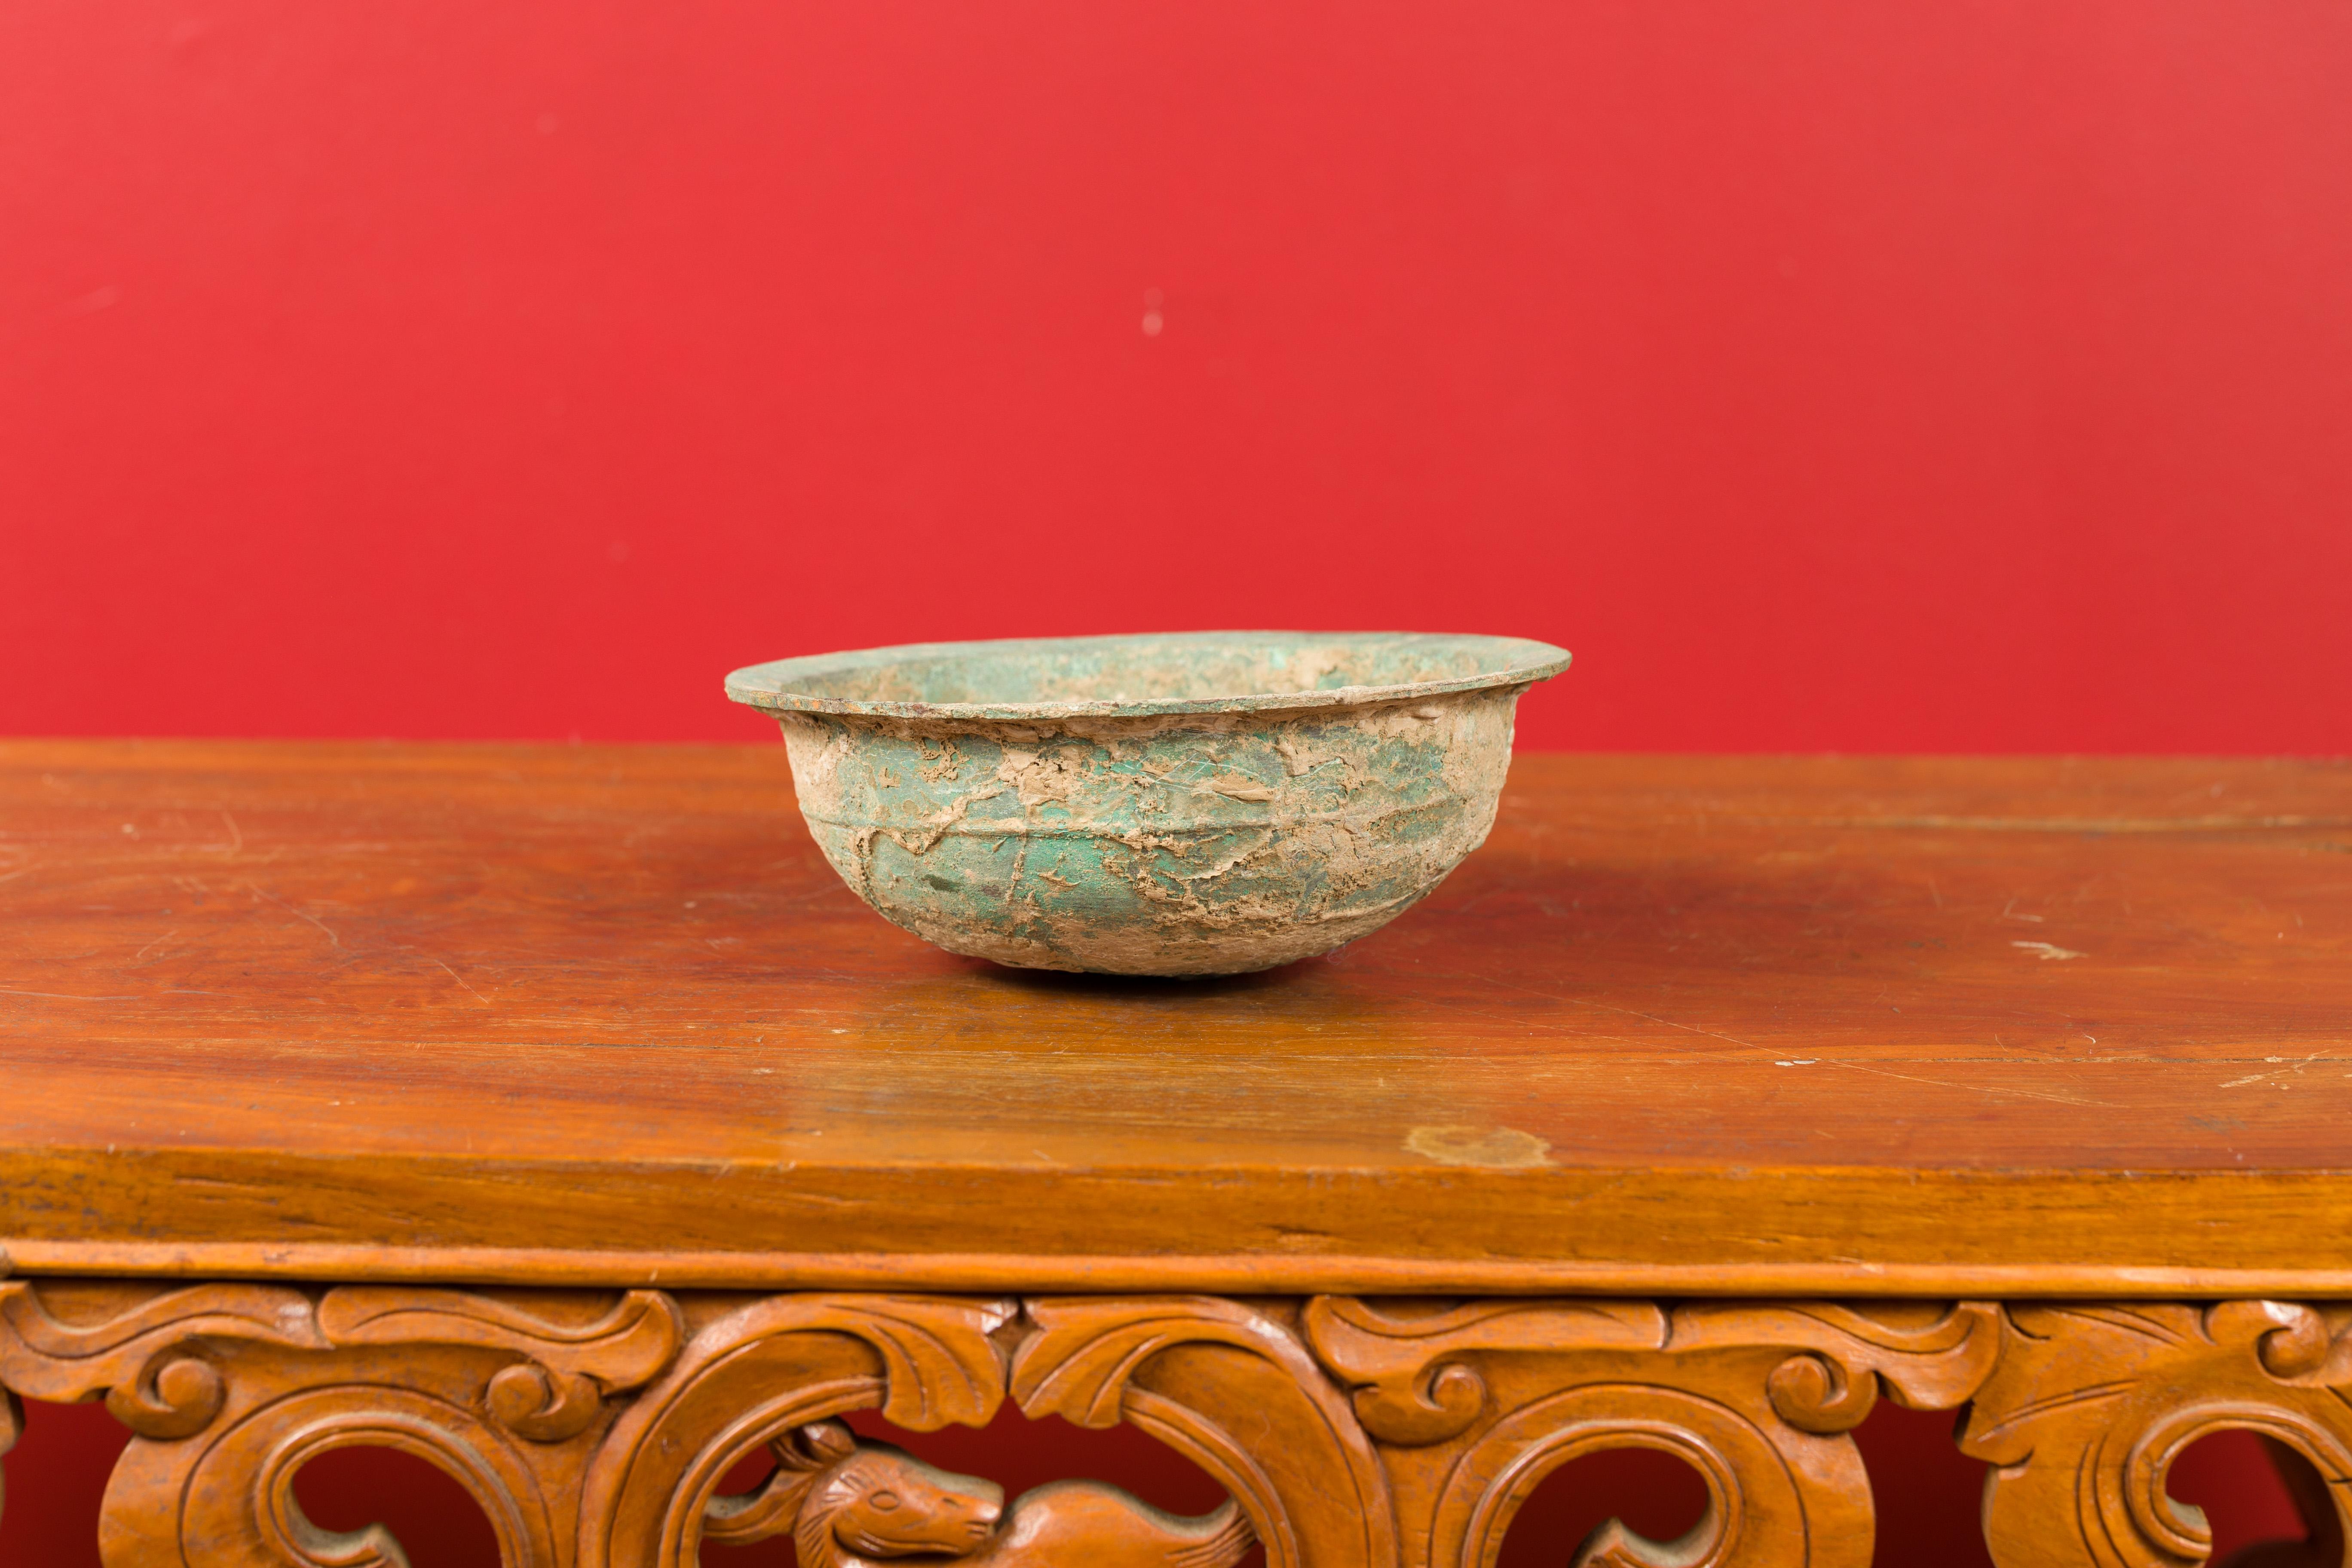 Chinese Han Dynasty Bronze Bowl circa 202 BC-200 AD with Mineral Deposits 9